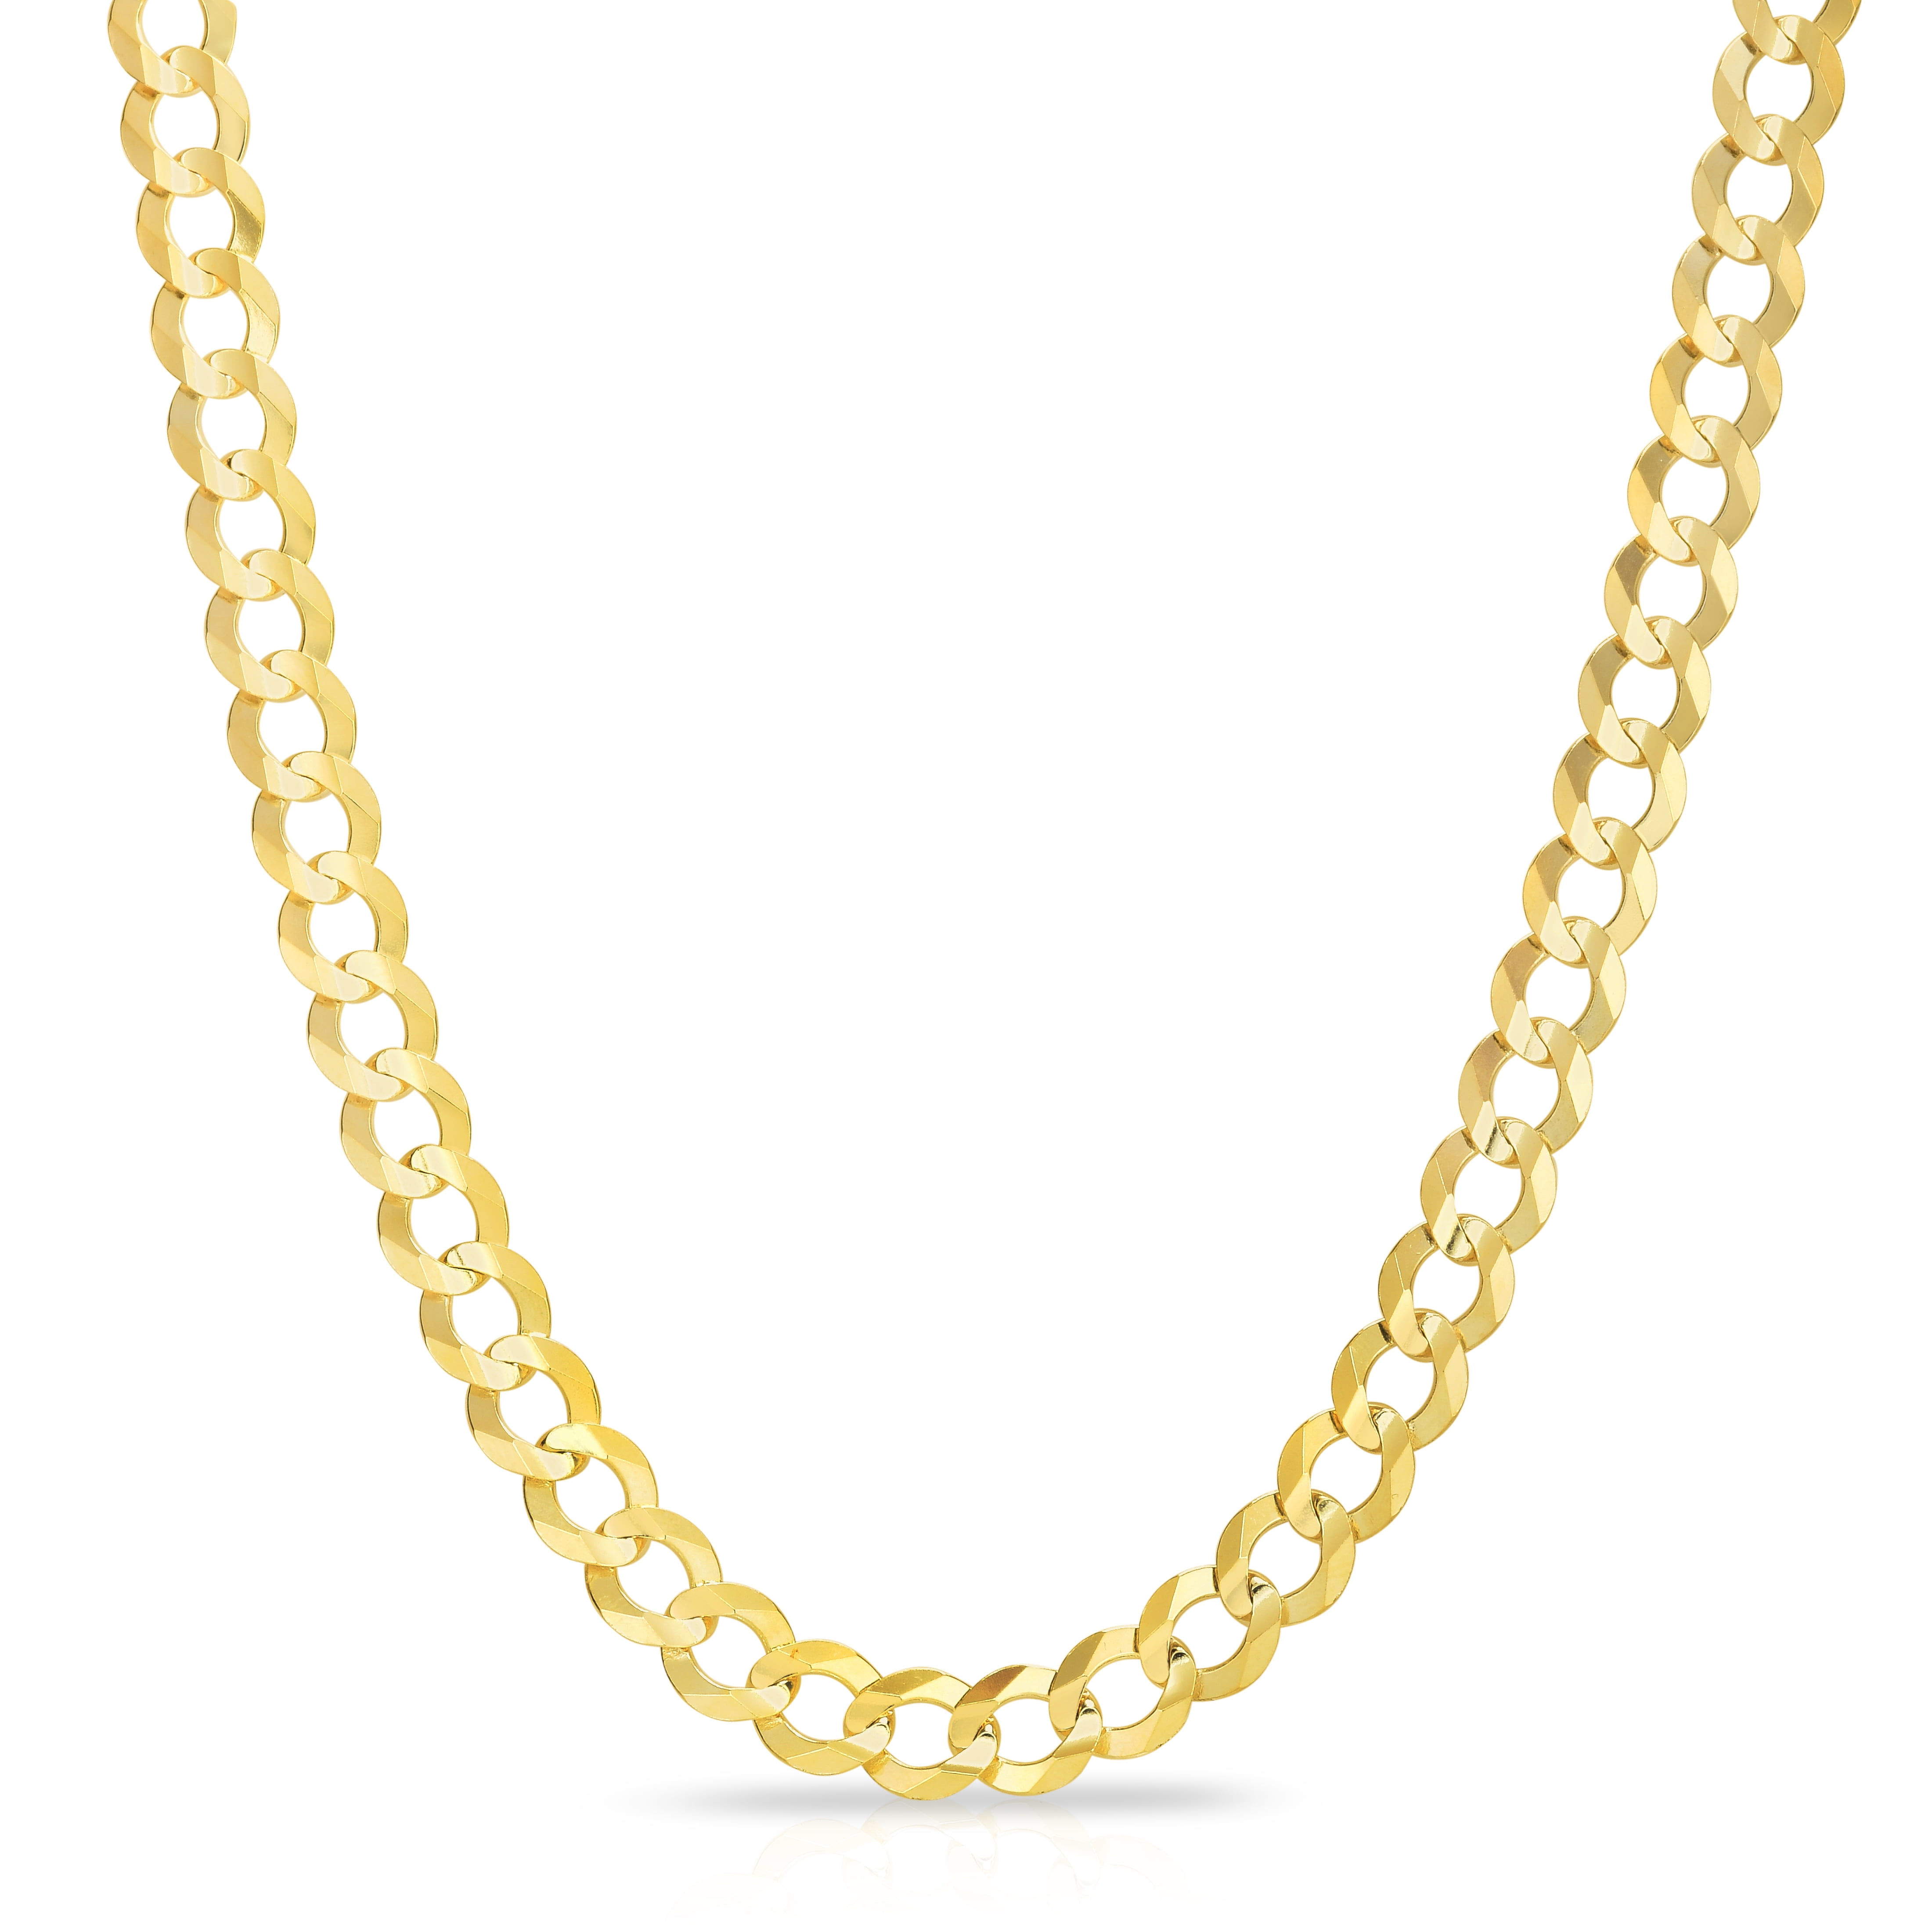 14k Yellow Gold 2.3mm Hollow Cuban Chain Link Necklace Necklace with Lobster Claw Clasp American Set Co